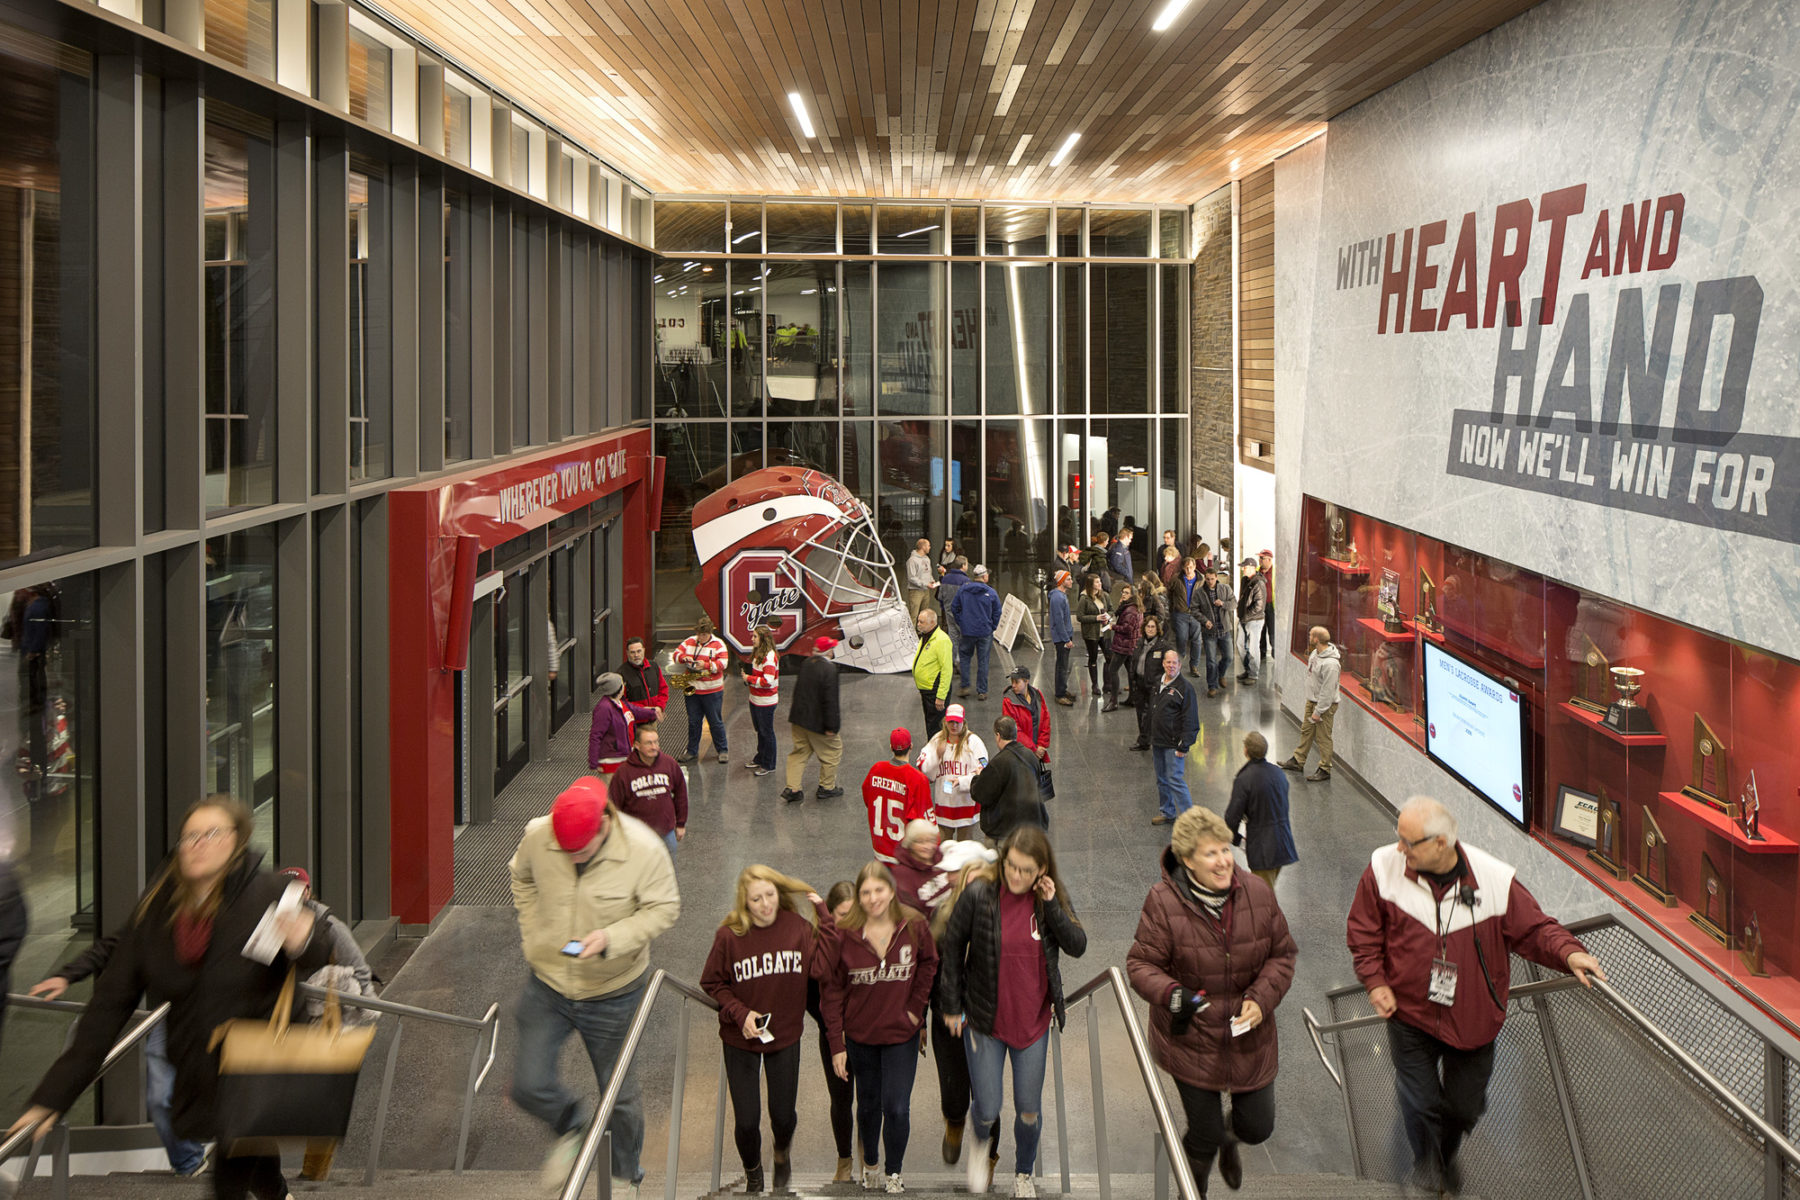 Futuristic hockey arena to come up at Sacred Heart varsity - Coliseum